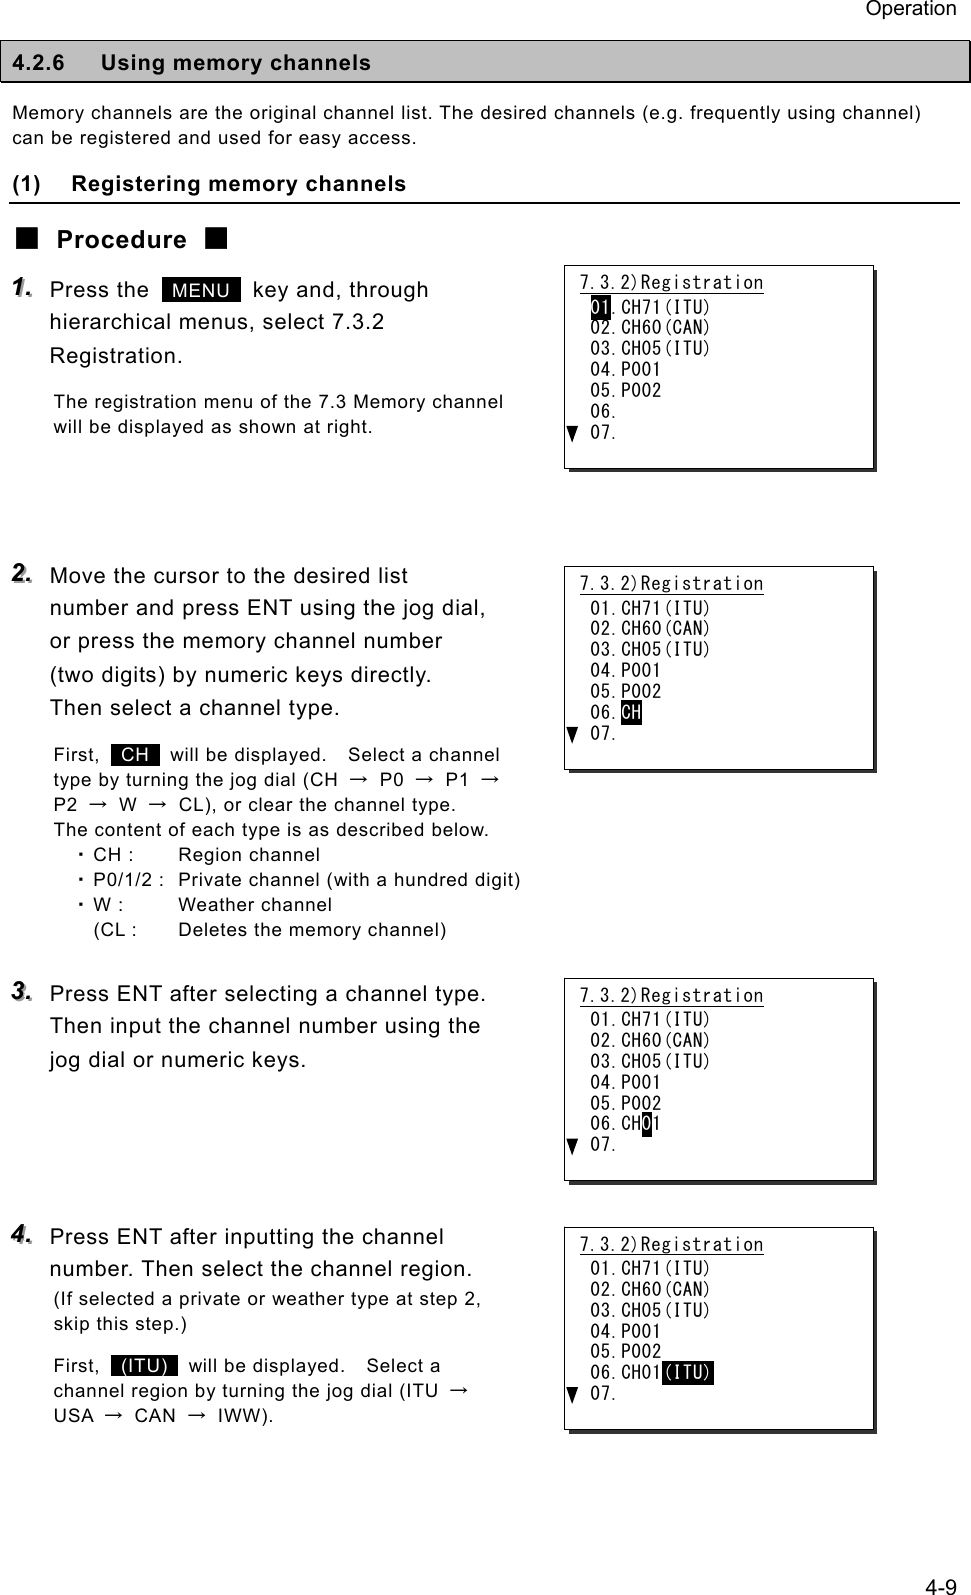 Operation 4-9 4.2.6 Using memory channels Memory channels are the original channel list. The desired channels (e.g. frequently using channel) can be registered and used for easy access. (1) Registering memory channels ■ Procedure ■ 111...   Press the   MENU  key and, through hierarchical menus, select 7.3.2 Registration. The registration menu of the 7.3 Memory channel will be displayed as shown at right.    222...   Move the cursor to the desired list number and press ENT using the jog dial, or press the memory channel number (two digits) by numeric keys directly. Then select a channel type. First,   CH   will be displayed.    Select a channel type by turning the jog dial (CH  → P0 → P1 → P2  → W →  CL), or clear the channel type.   The content of each type is as described below. ・ CH :  Region channel ・ P0/1/2 :  Private channel (with a hundred digit) ・ W :  Weather channel   (CL :  Deletes the memory channel)  333...   Press ENT after selecting a channel type. Then input the channel number using the jog dial or numeric keys.      444...   Press ENT after inputting the channel number. Then select the channel region. (If selected a private or weather type at step 2, skip this step.) First,   (ITU)   will be displayed.    Select a channel region by turning the jog dial (ITU  → USA  → CAN → IWW). 7.3.2)Registration 01.CH71(ITU) 02.CH60(CAN) 03.CH05(ITU) 04.P001 05.P002 06. 07. 7.3.2)Registration 01.CH71(ITU) 02.CH60(CAN) 03.CH05(ITU) 04.P001 05.P002 06.CH 07. 7.3.2)Registration 01.CH71(ITU) 02.CH60(CAN) 03.CH05(ITU) 04.P001 05.P002 06.CH01 07. 7.3.2)Registration 01.CH71(ITU) 02.CH60(CAN) 03.CH05(ITU) 04.P001 05.P002 06.CH01(ITU) 07. 